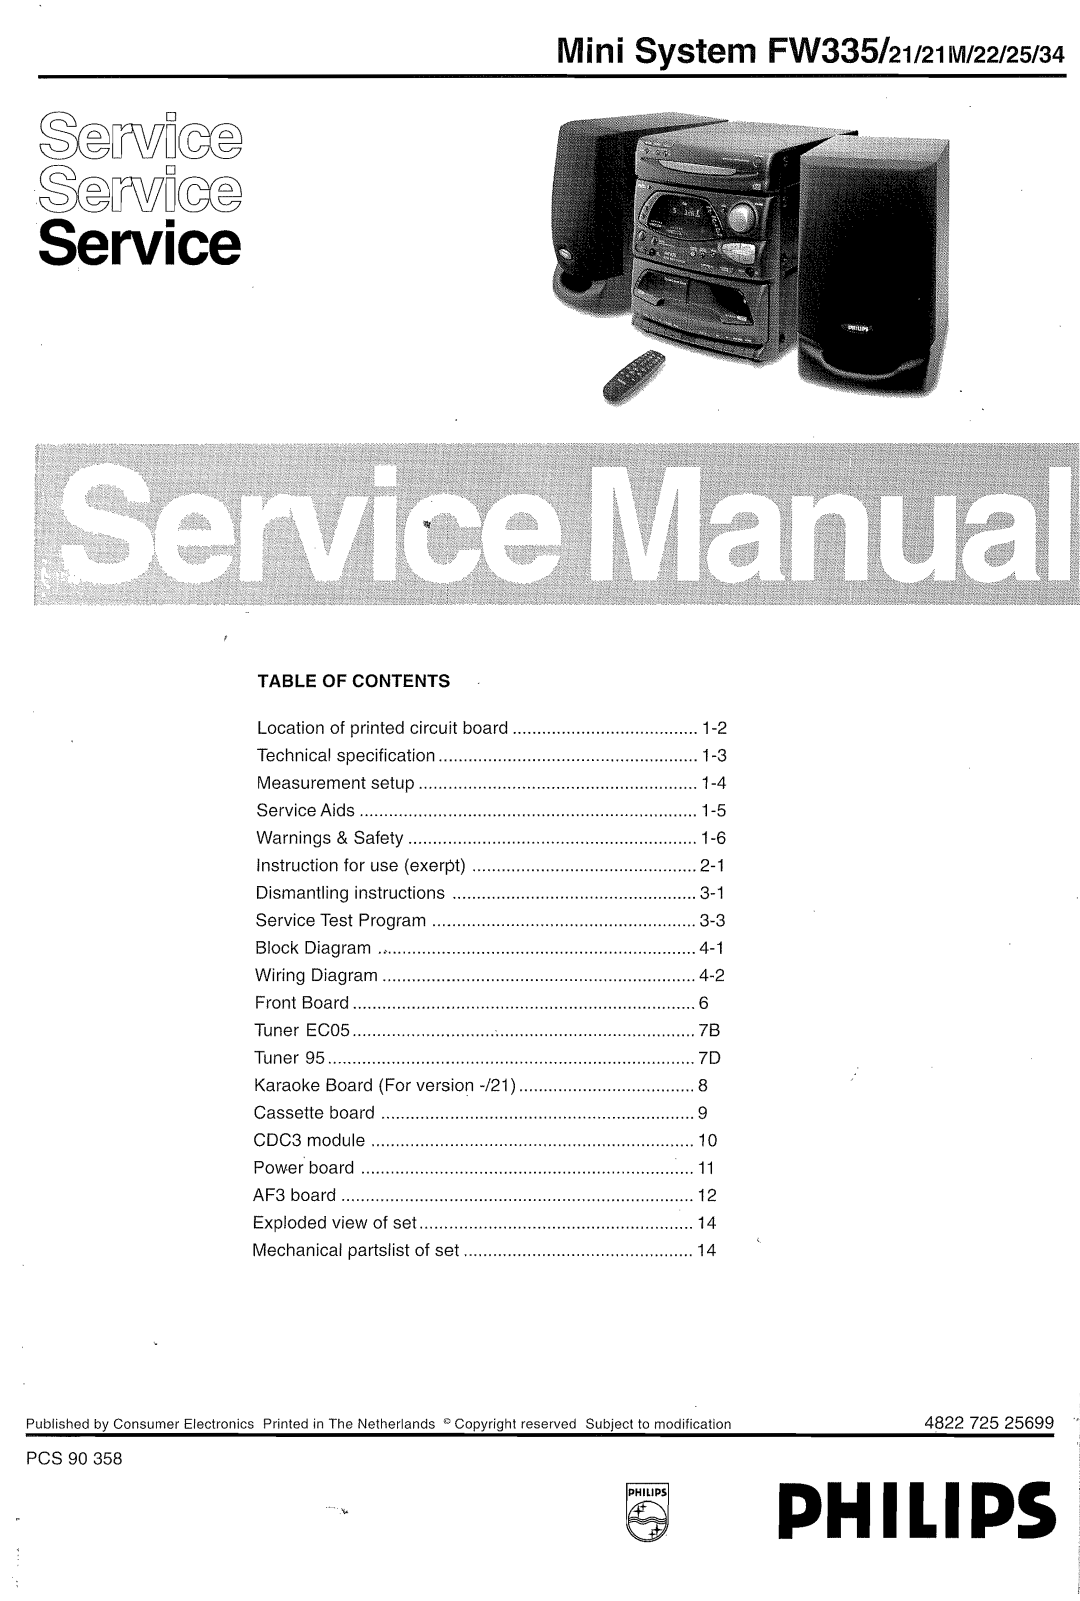 Philips FW-335 Service Manual